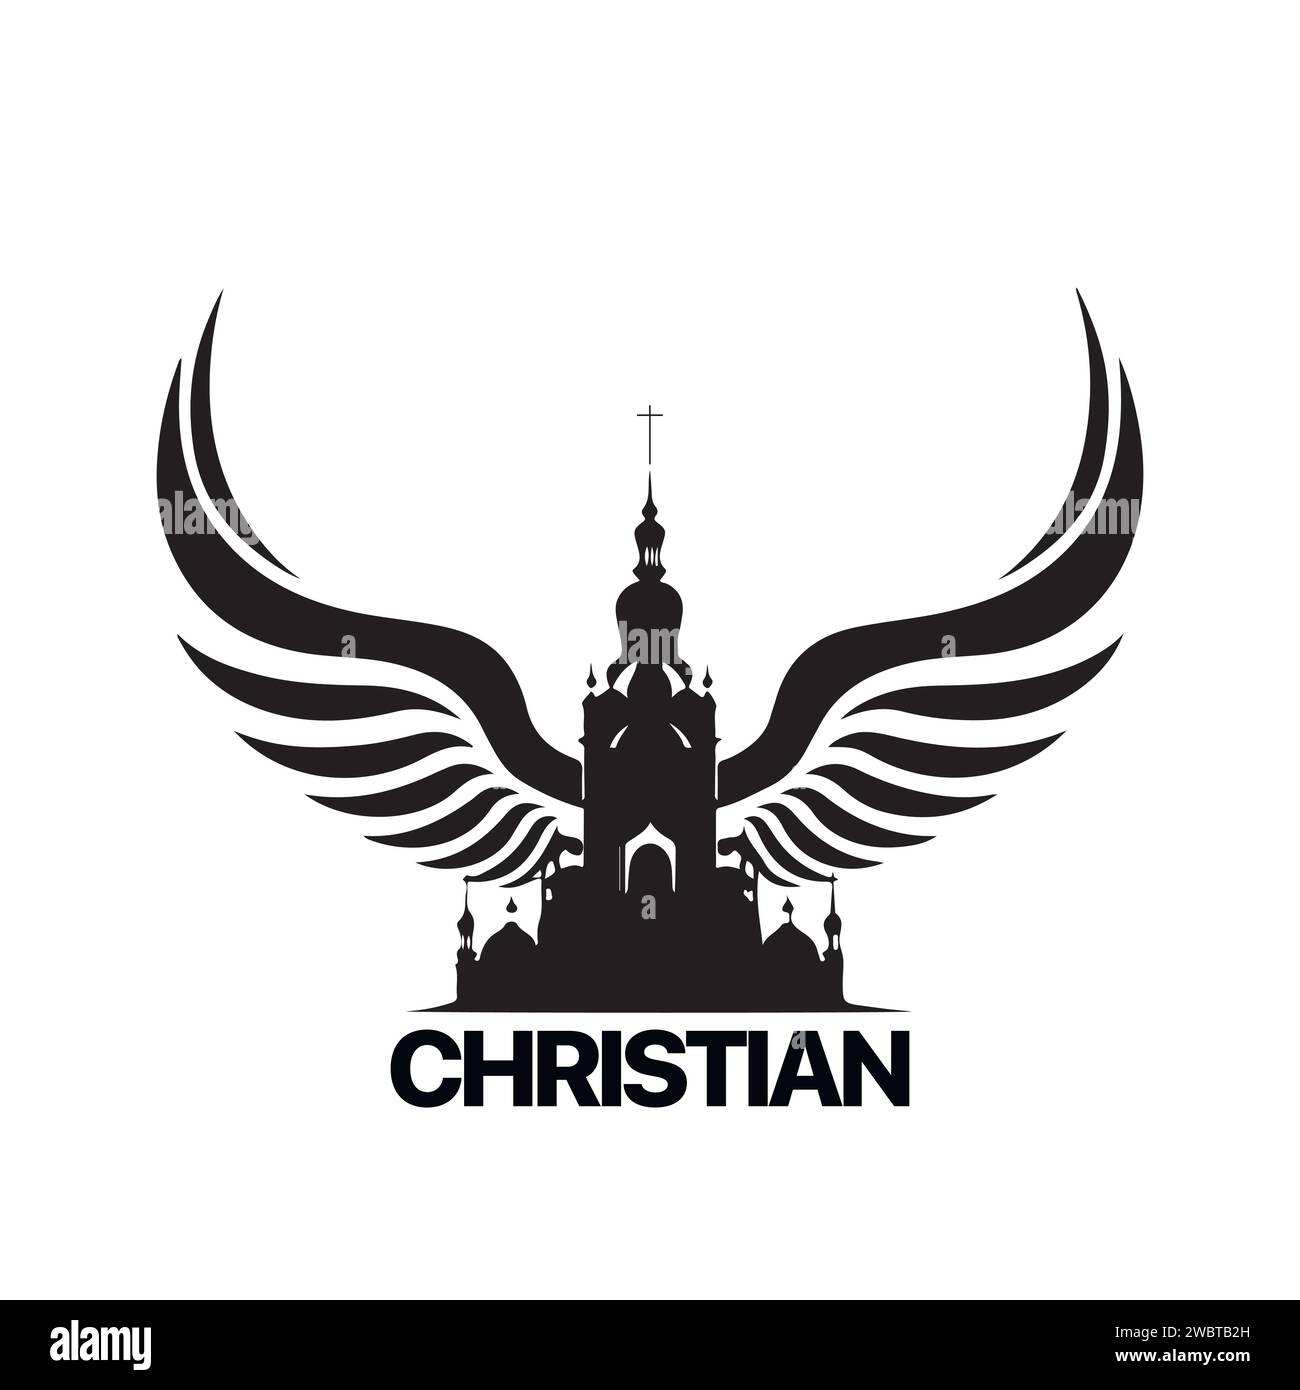 Christian Logo template with church, temple and dove wings. Black and white christian symbol. Pigeon wings and church tower logotype Stock Vector